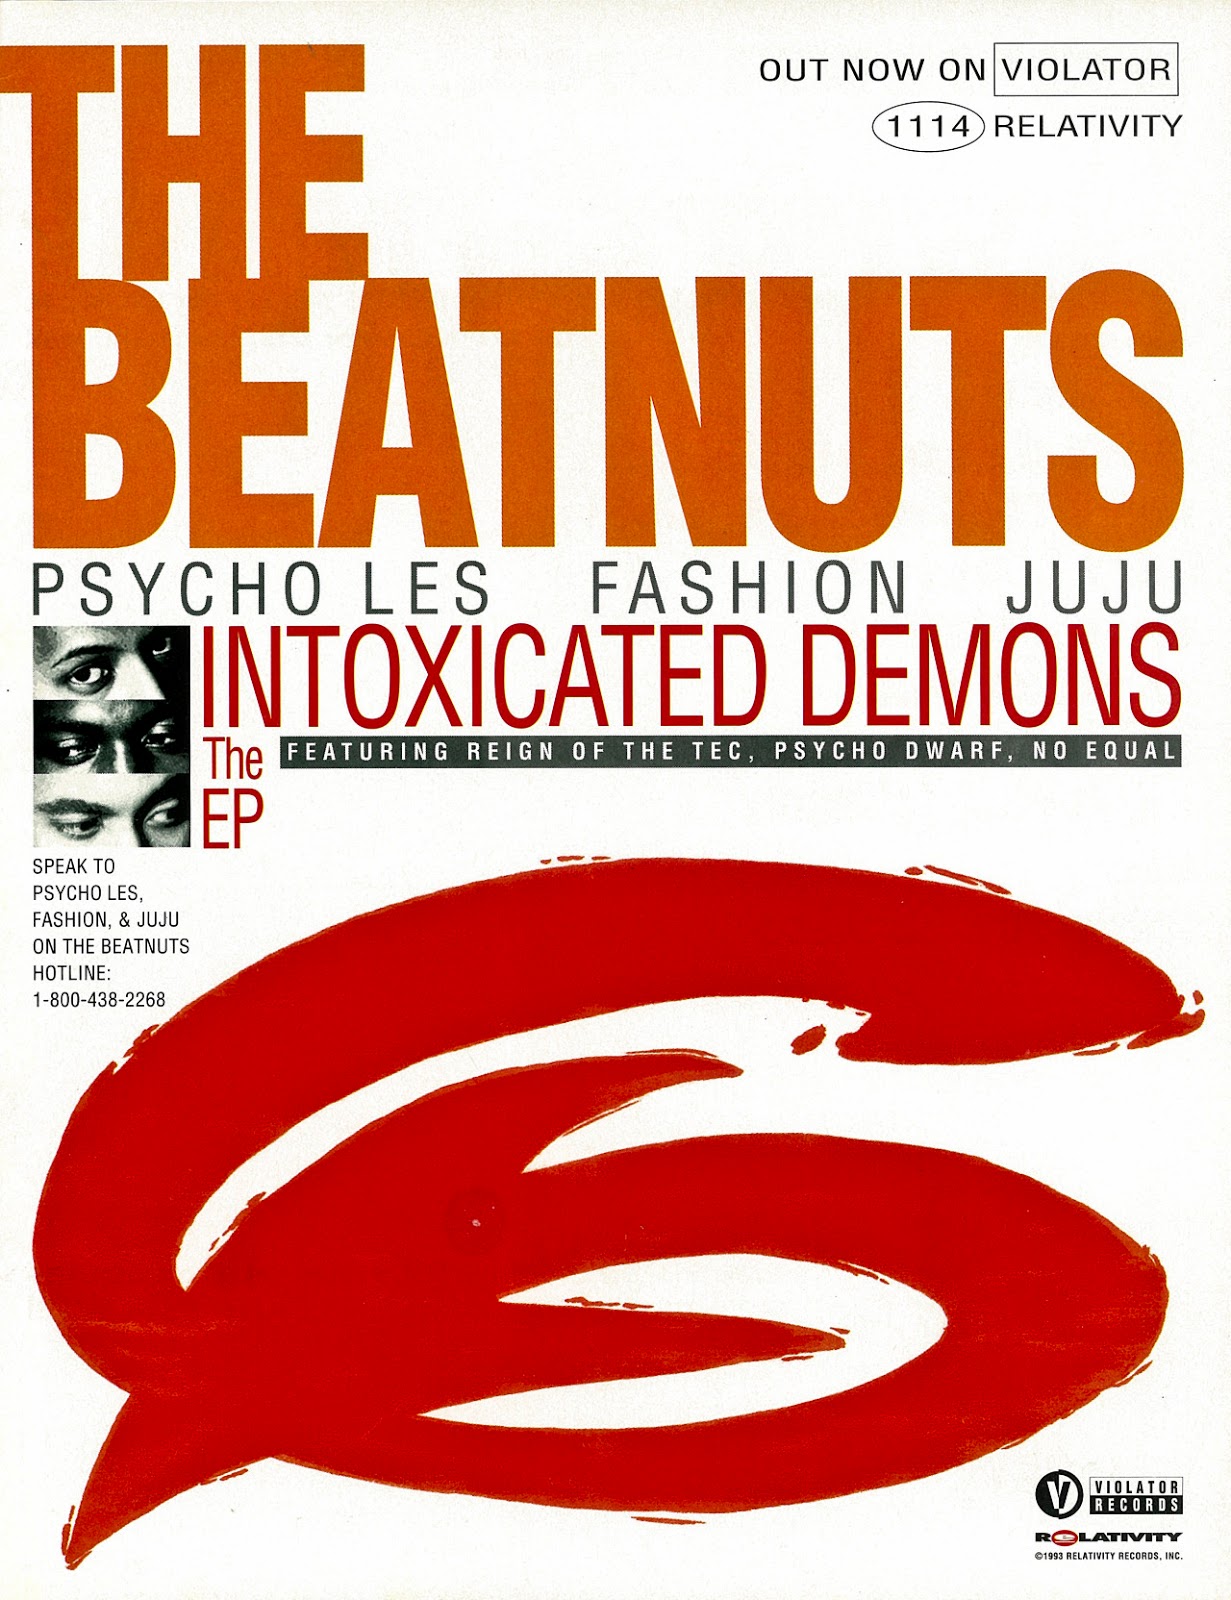 The Beatnuts Intoxicated Demons 1993 EP Advertisement